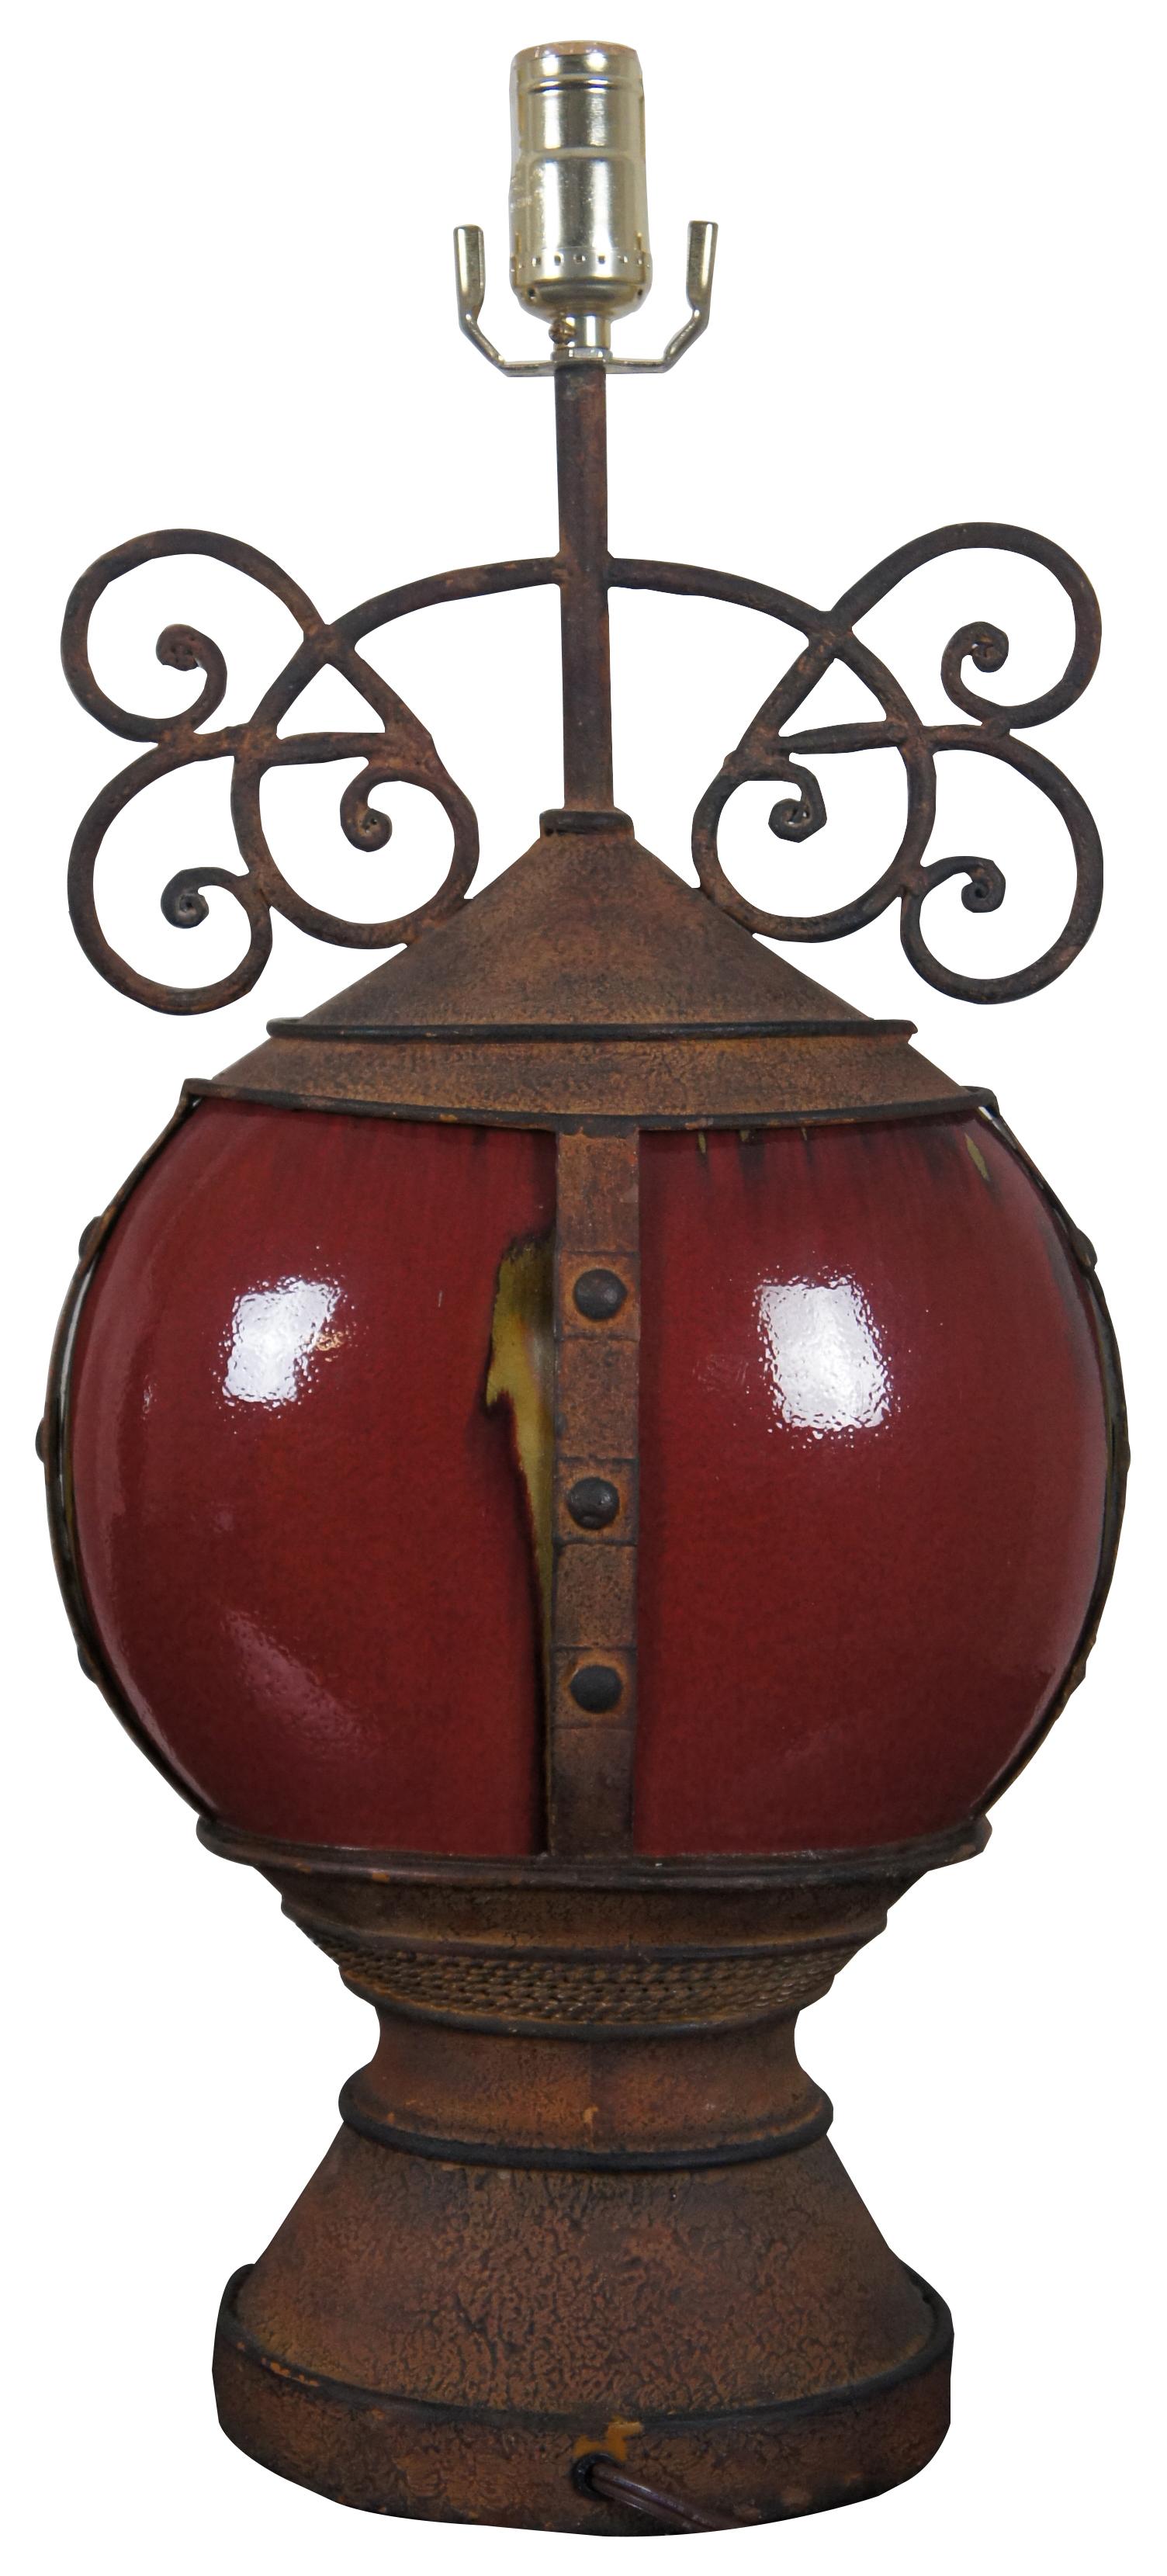 Rustic 2 Southwestern Scrolled Wrought Iron Oxblood Red Ceramic Table Lamps Light